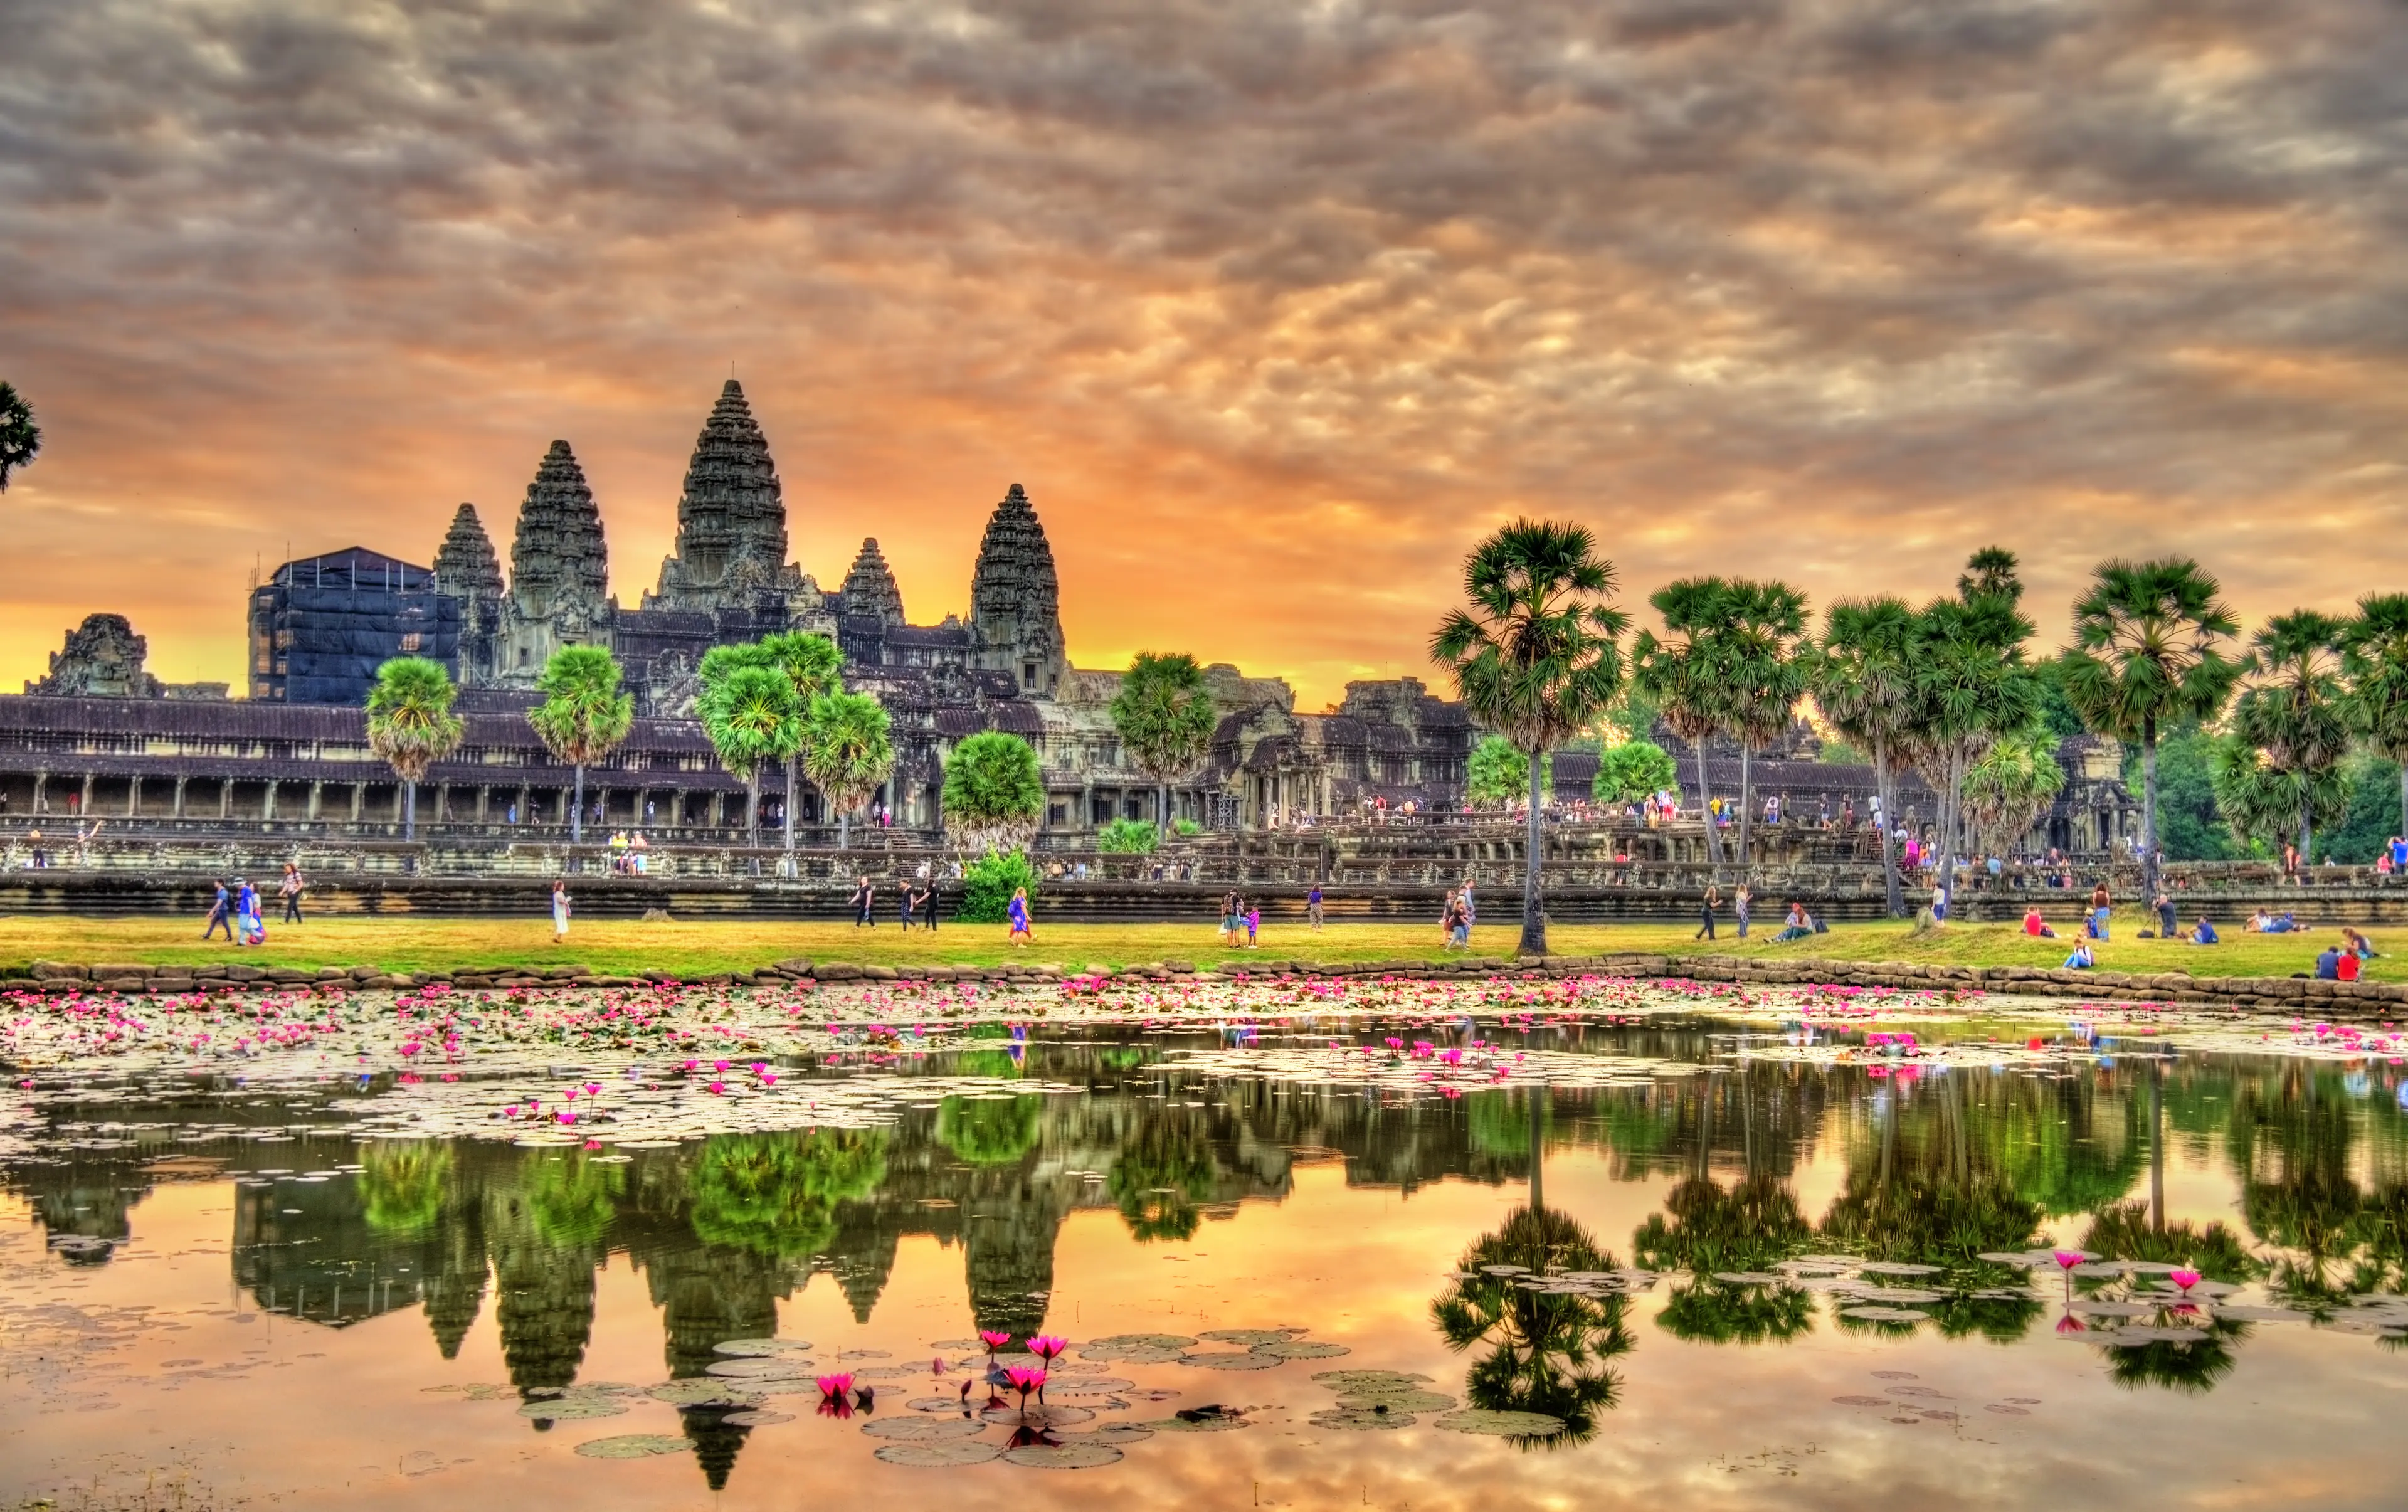 1-Day Solo Adventure and Nightlife Experience at Angkor Wat